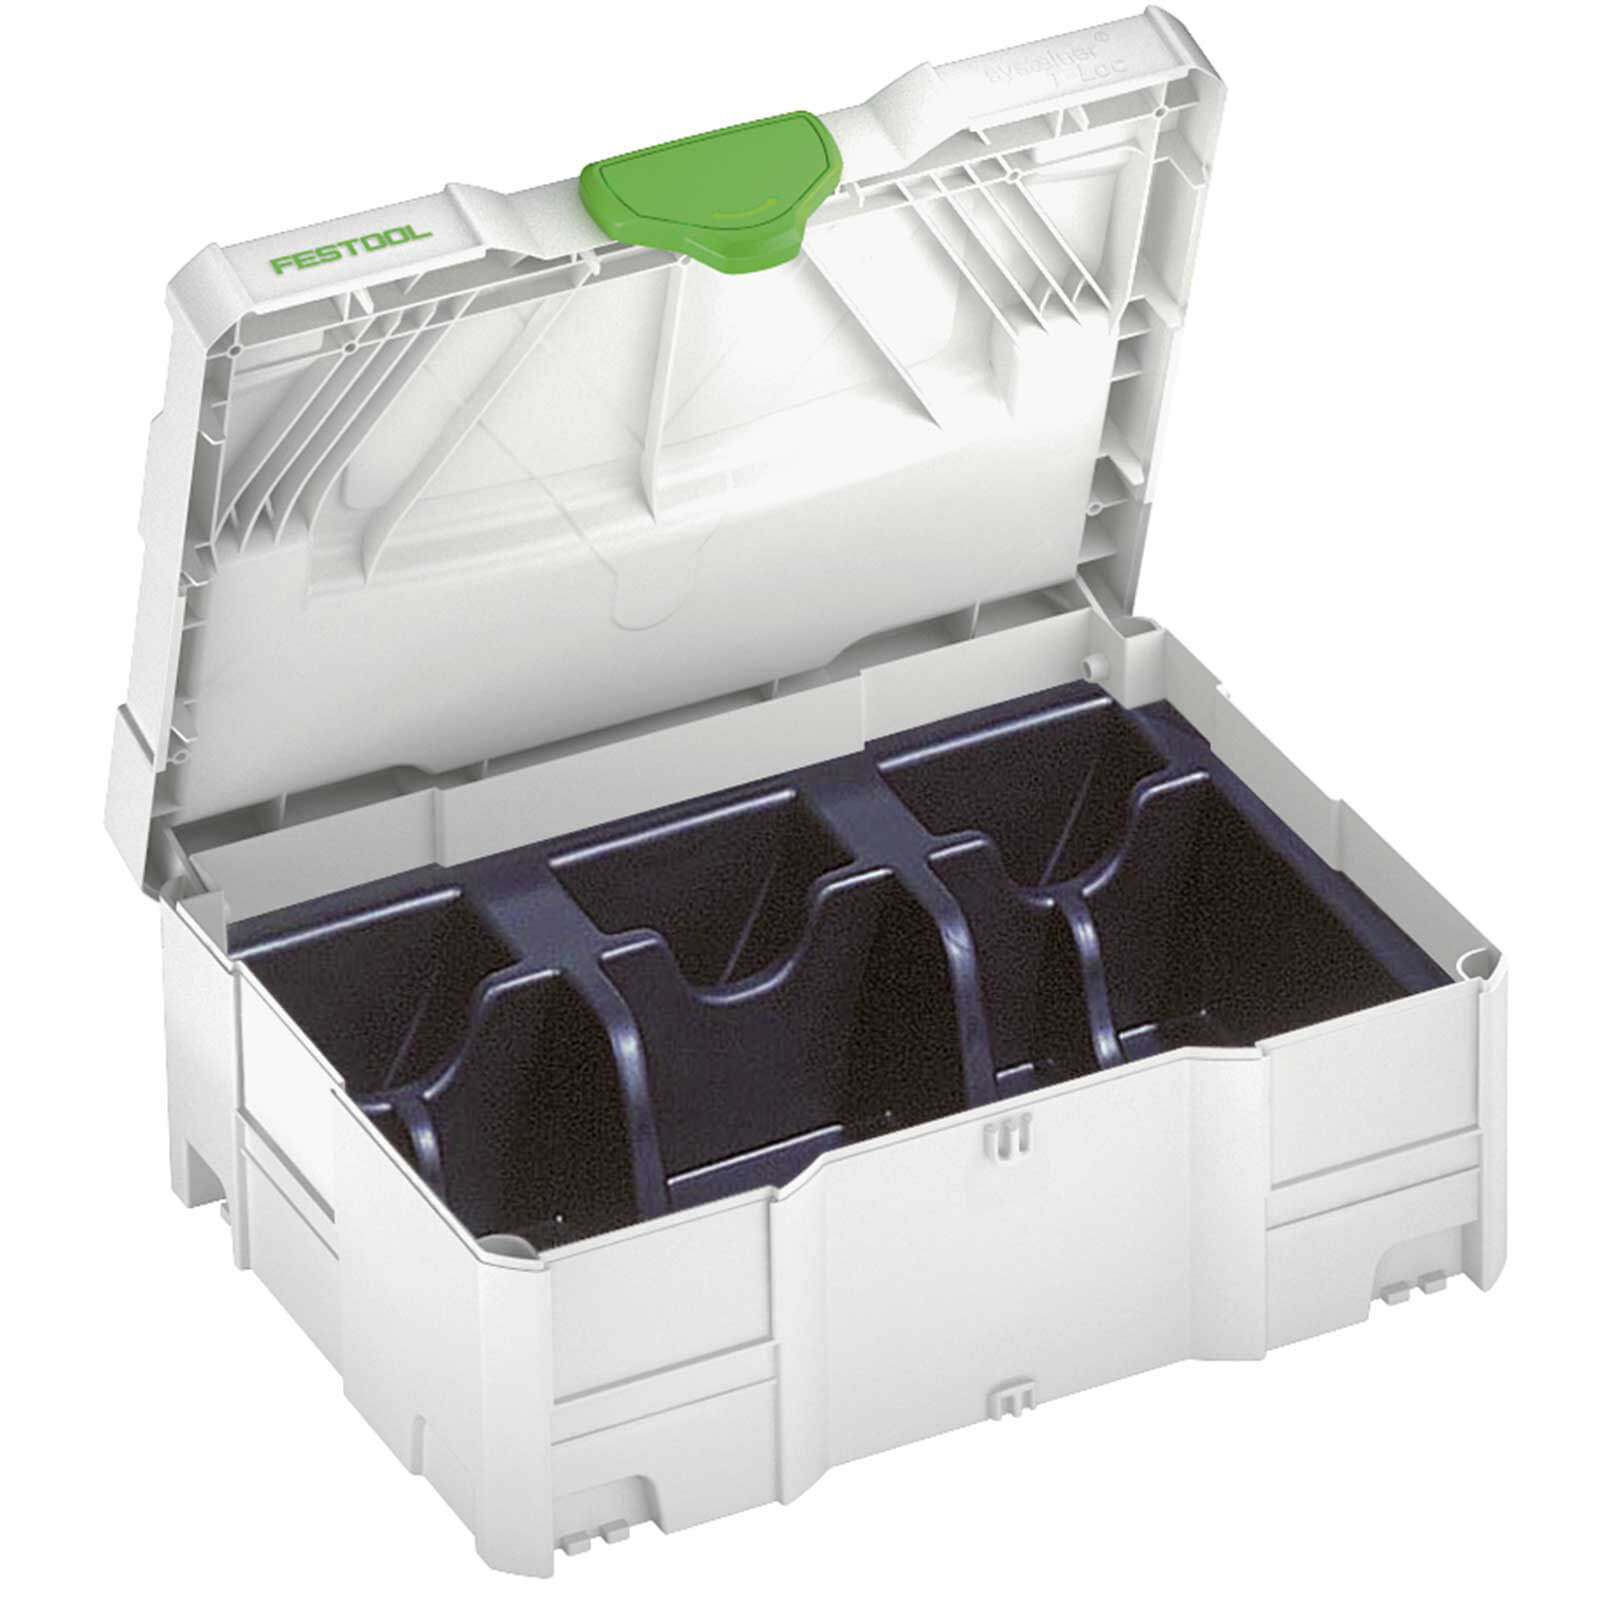 Photo of Festool Sys-stf D125 Systainer Case For Abrasives